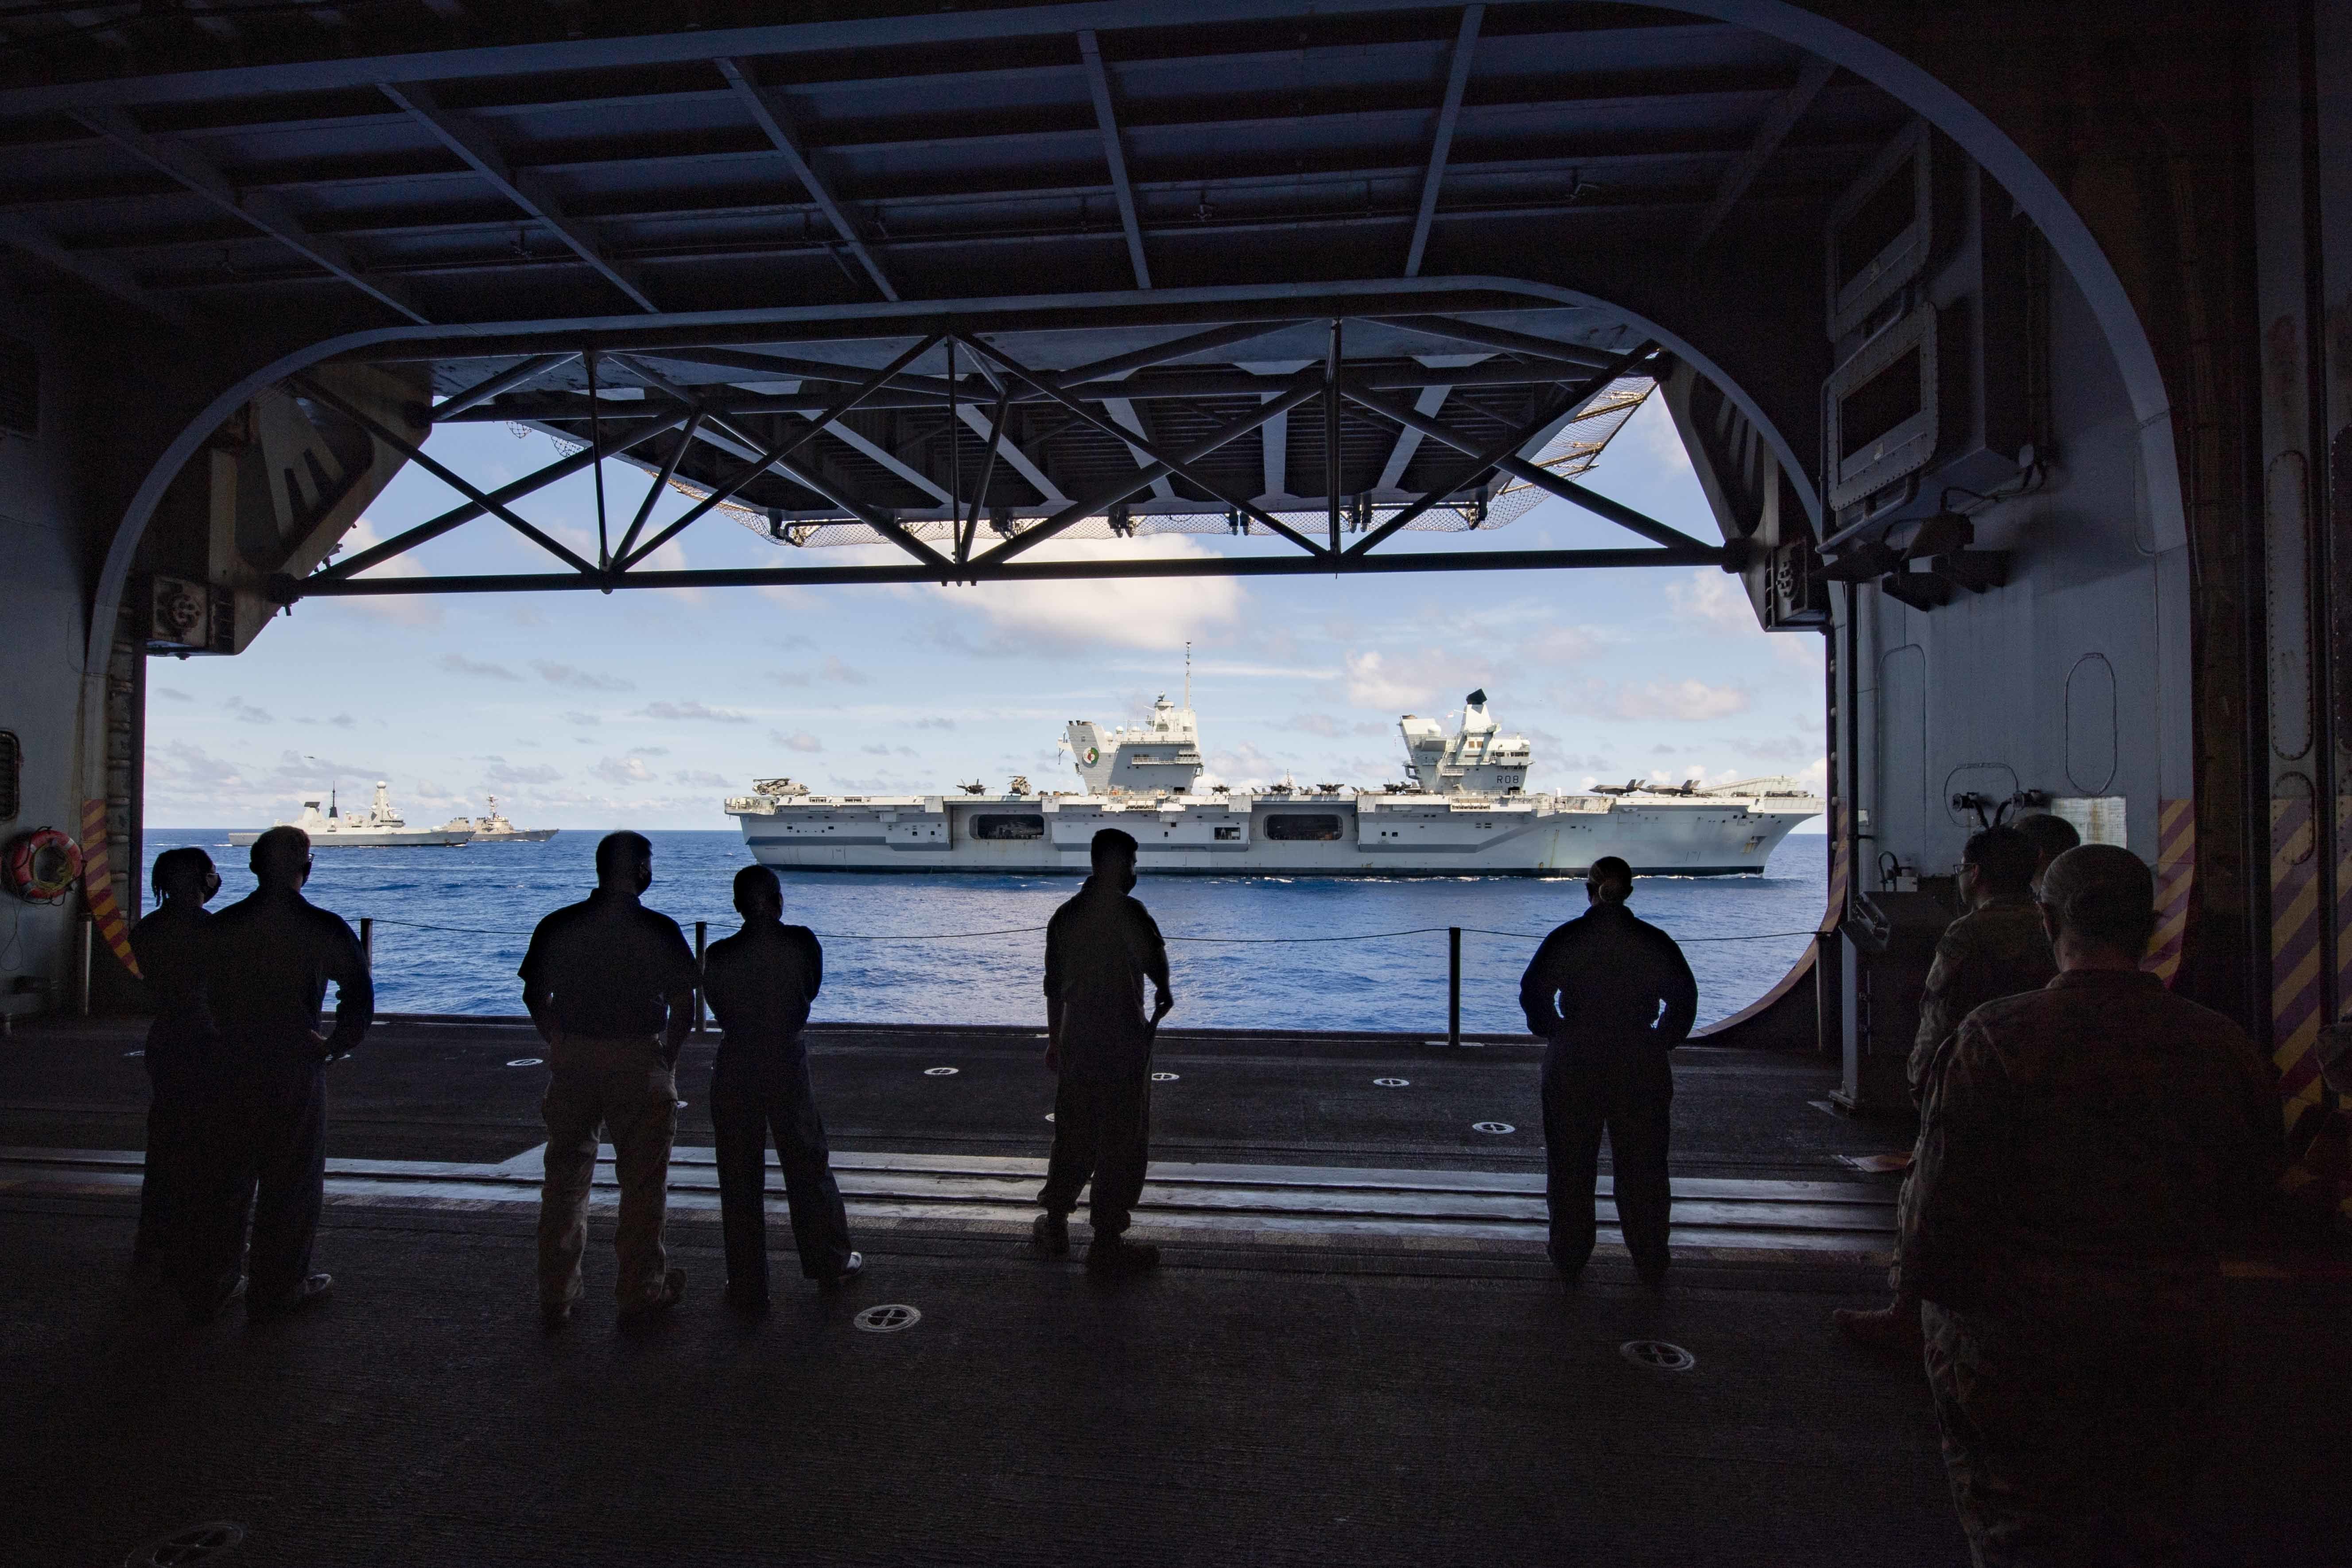 Sailors and Marines watch the Royal Navy aircraft carrier HMS Queen Elizabeth (R 08), foreground, followed by the Royal Navy destroyer HMS Defender (D 36) in the ship�s hangar bay